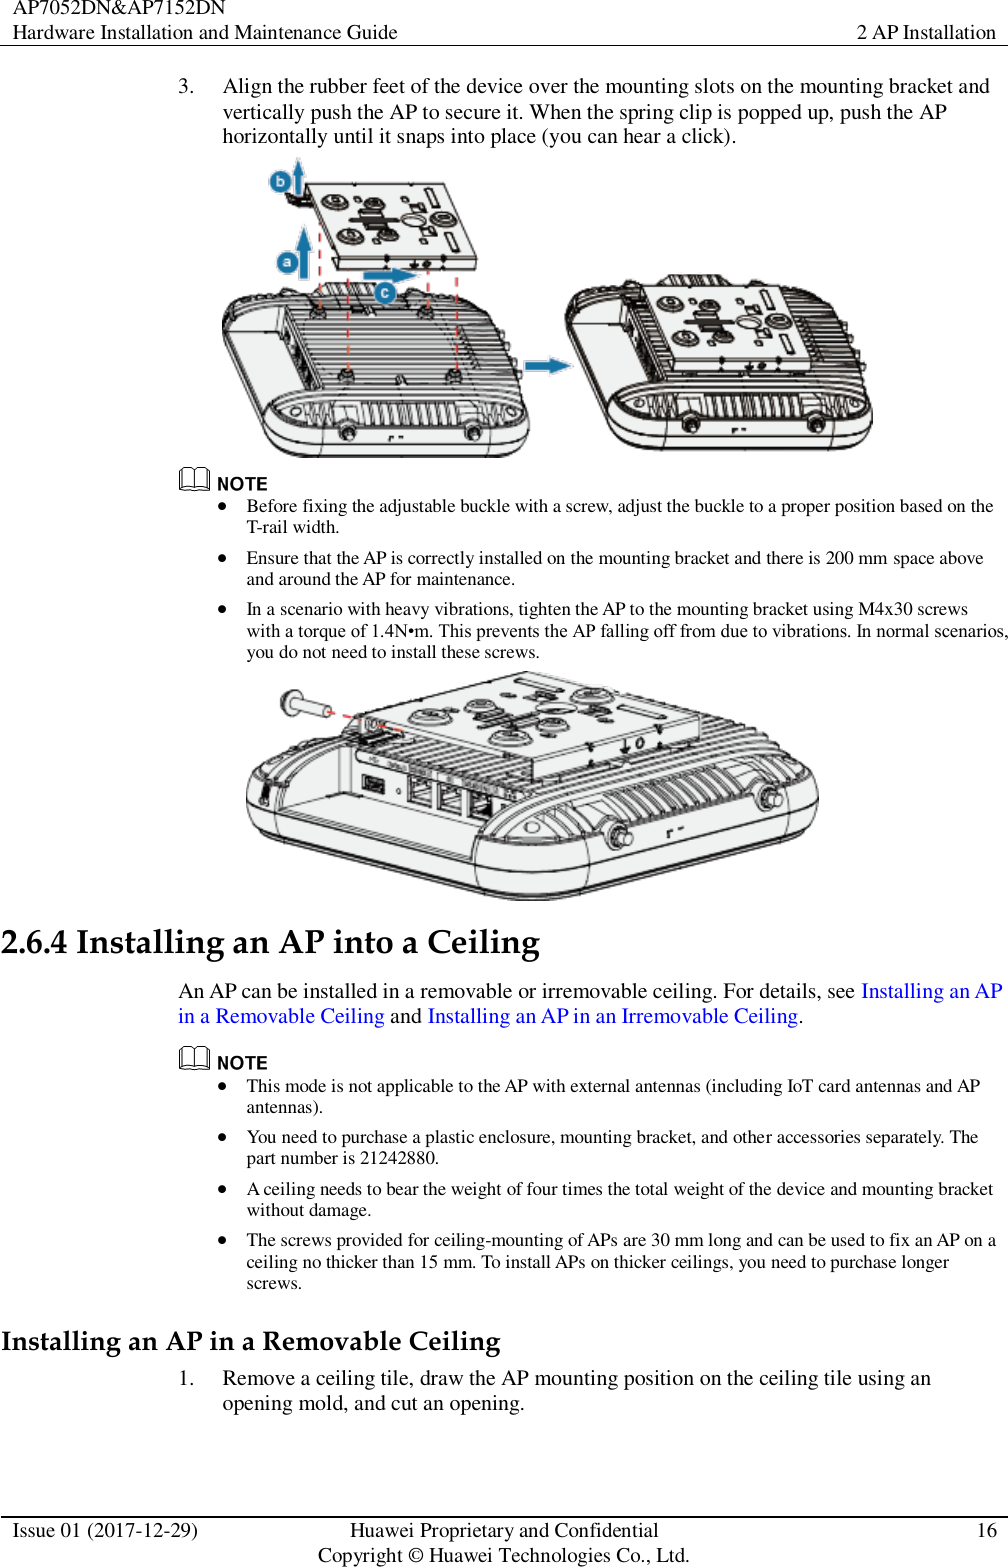 AP7052DN&amp;AP7152DN Hardware Installation and Maintenance Guide 2 AP Installation  Issue 01 (2017-12-29) Huawei Proprietary and Confidential                                     Copyright © Huawei Technologies Co., Ltd. 16  3. Align the rubber feet of the device over the mounting slots on the mounting bracket and vertically push the AP to secure it. When the spring clip is popped up, push the AP horizontally until it snaps into place (you can hear a click).    Before fixing the adjustable buckle with a screw, adjust the buckle to a proper position based on the T-rail width.  Ensure that the AP is correctly installed on the mounting bracket and there is 200 mm space above and around the AP for maintenance.    In a scenario with heavy vibrations, tighten the AP to the mounting bracket using M4x30 screws with a torque of 1.4N•m. This prevents the AP falling off from due to vibrations. In normal scenarios, you do not need to install these screws.  2.6.4 Installing an AP into a Ceiling An AP can be installed in a removable or irremovable ceiling. For details, see Installing an AP in a Removable Ceiling and Installing an AP in an Irremovable Ceiling.   This mode is not applicable to the AP with external antennas (including IoT card antennas and AP antennas).  You need to purchase a plastic enclosure, mounting bracket, and other accessories separately. The part number is 21242880.  A ceiling needs to bear the weight of four times the total weight of the device and mounting bracket without damage.  The screws provided for ceiling-mounting of APs are 30 mm long and can be used to fix an AP on a ceiling no thicker than 15 mm. To install APs on thicker ceilings, you need to purchase longer screws. Installing an AP in a Removable Ceiling 1. Remove a ceiling tile, draw the AP mounting position on the ceiling tile using an opening mold, and cut an opening. 